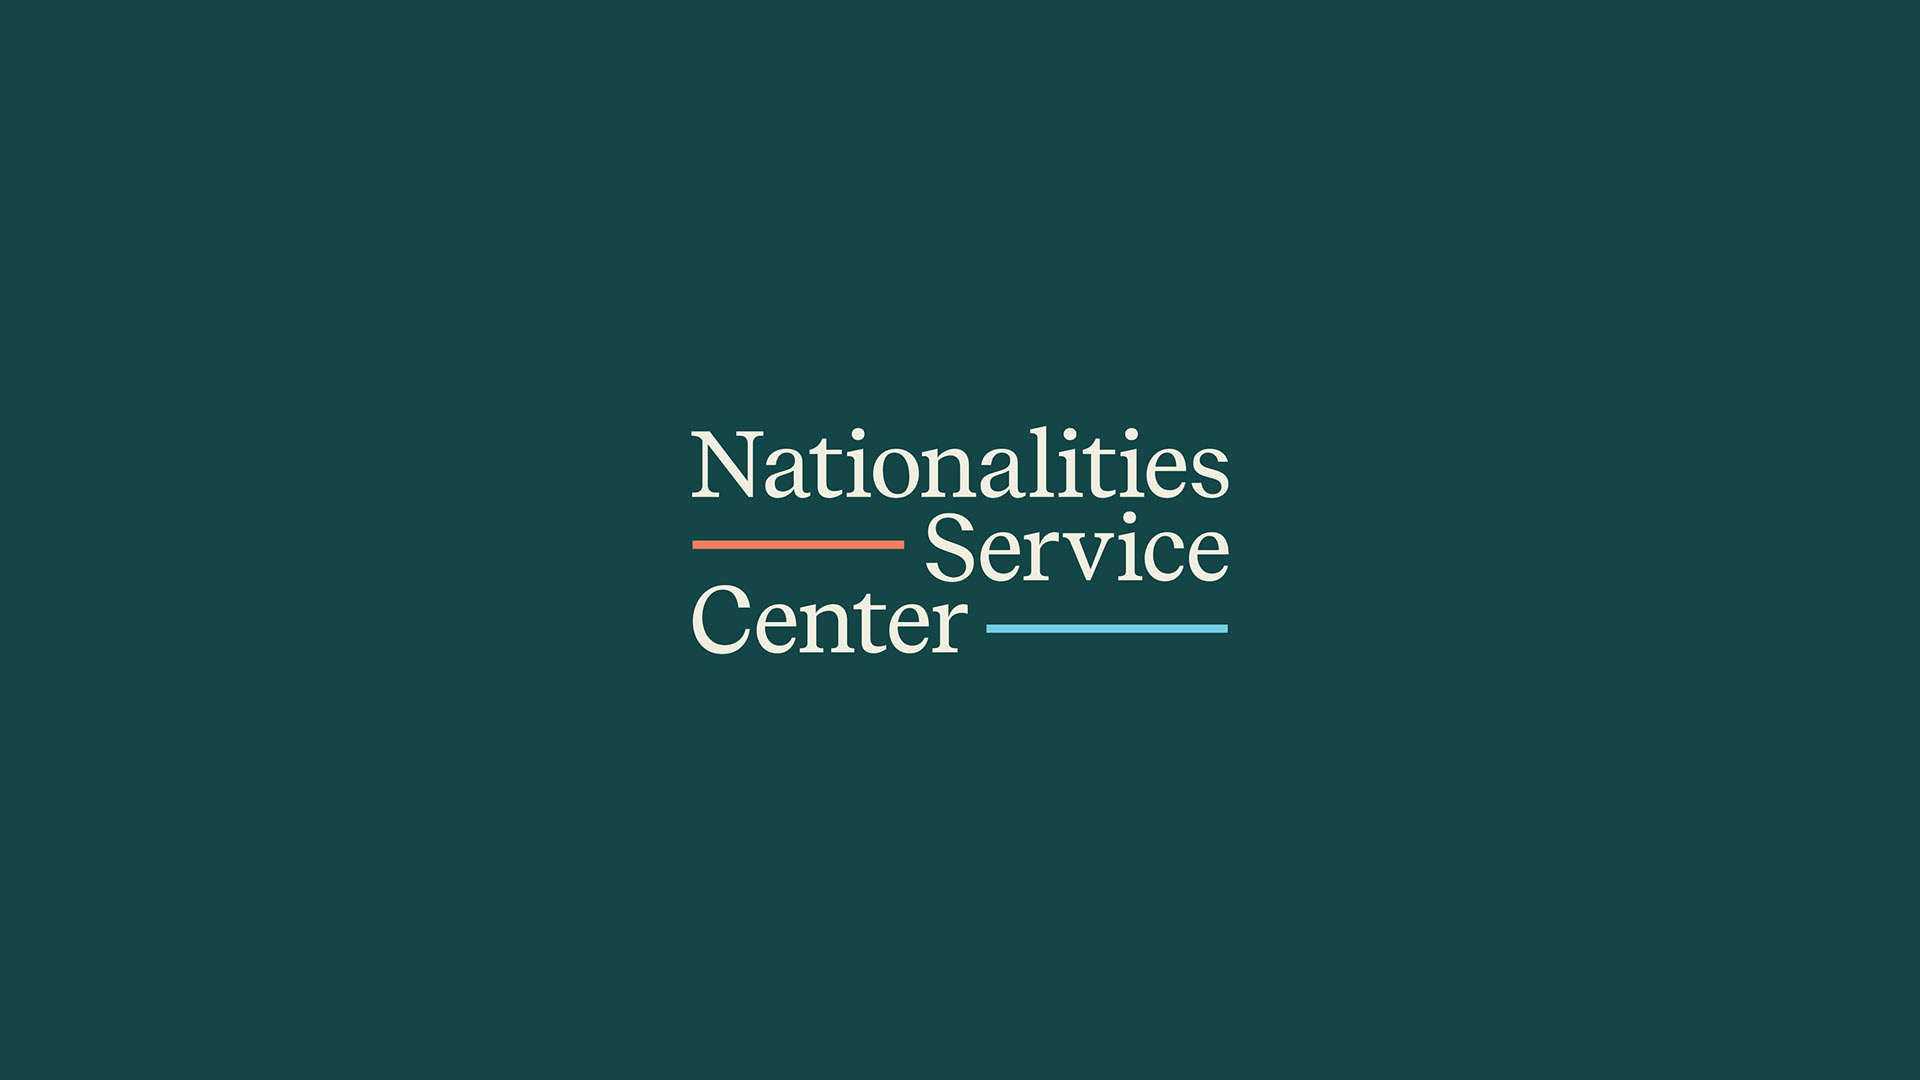 Nationalities Service Center Brand Concept